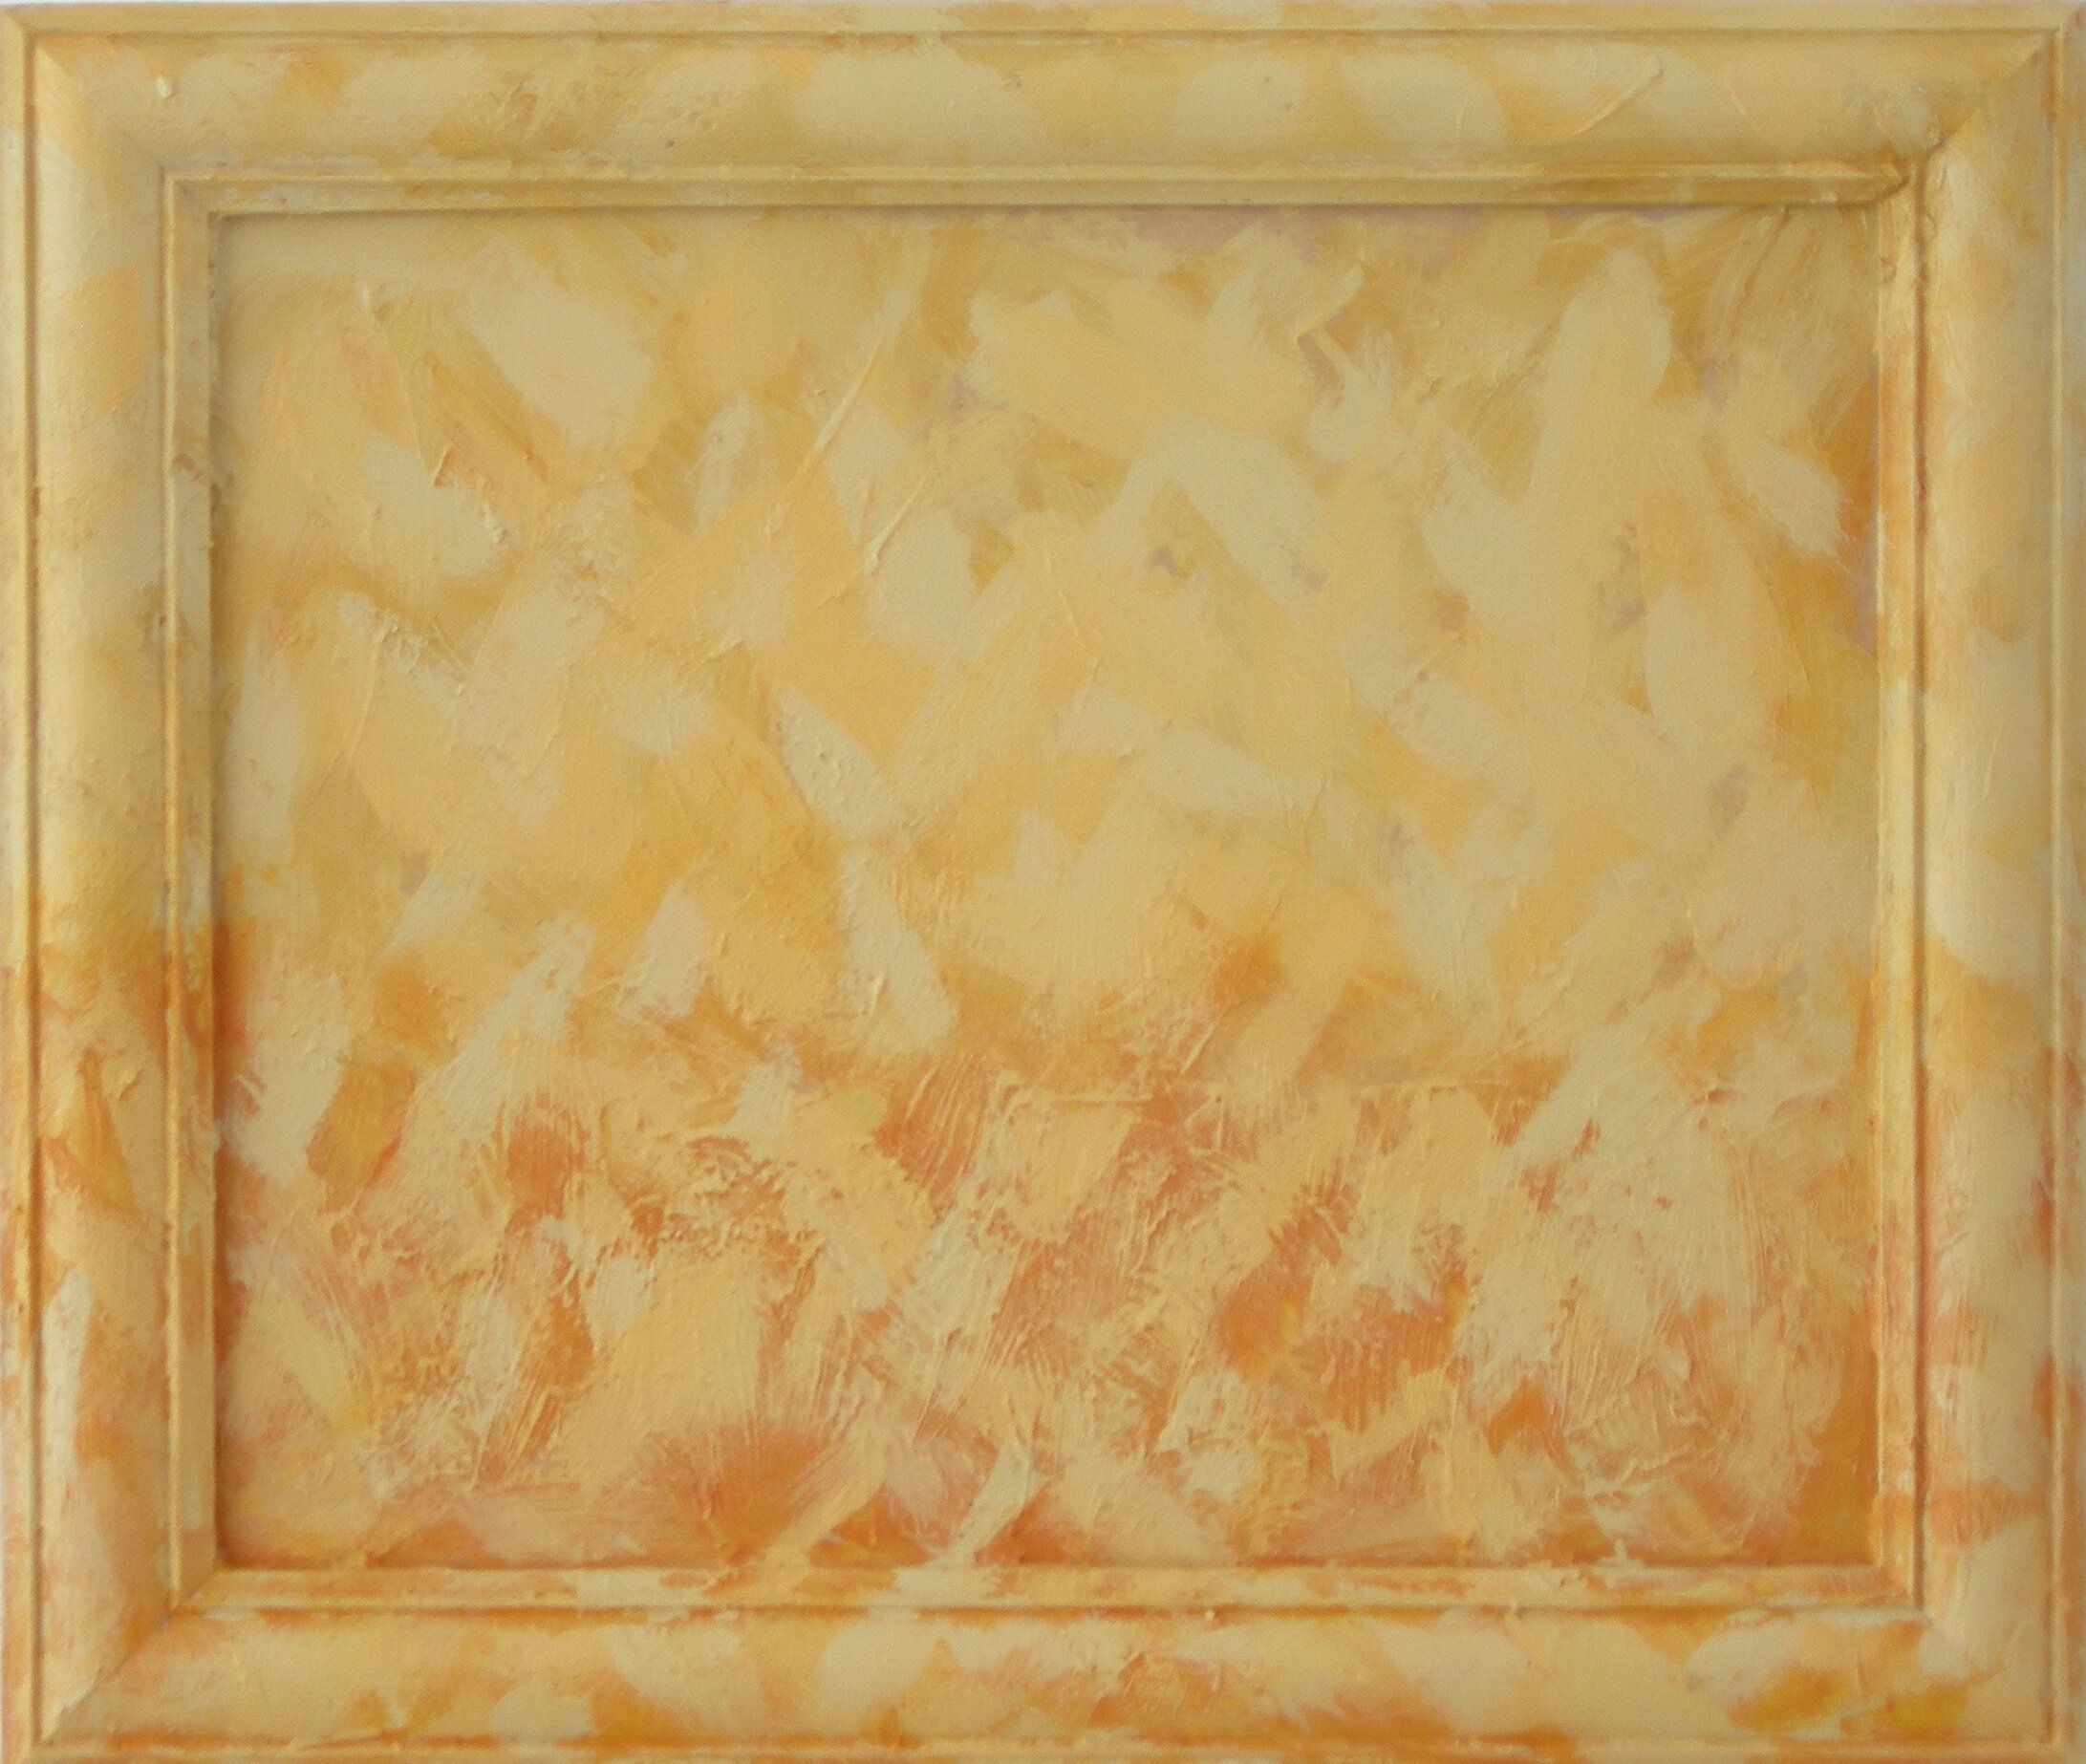 Phillip Flockhart; Ochre II  , 2008, Original Bas Relief, 10 x 11 inches. Artwork description: 241 Acrylic on found material.  SOLD Signed numbered and dated A4 Print only Limited Edition of 100...